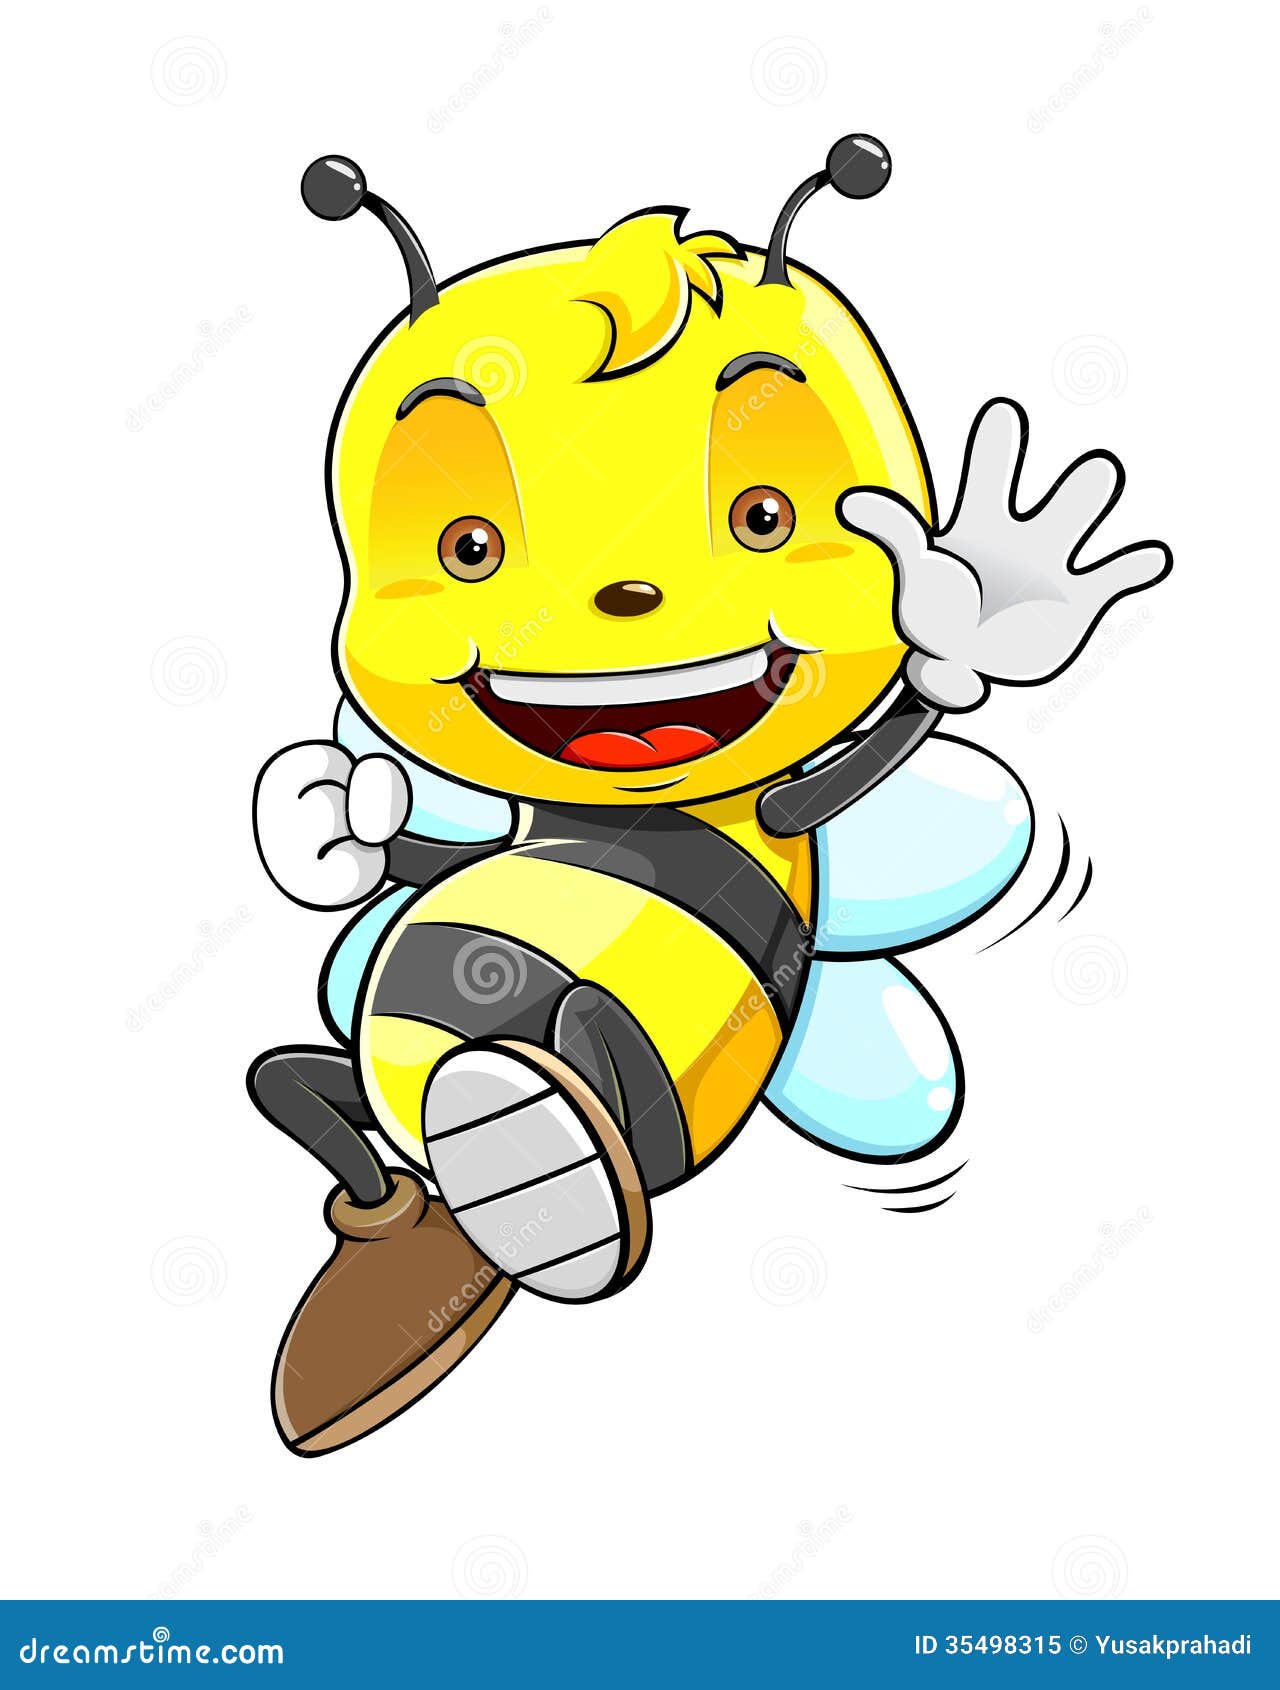 Cute Honey Bee stock vector. Image of cheerful, funny ...
